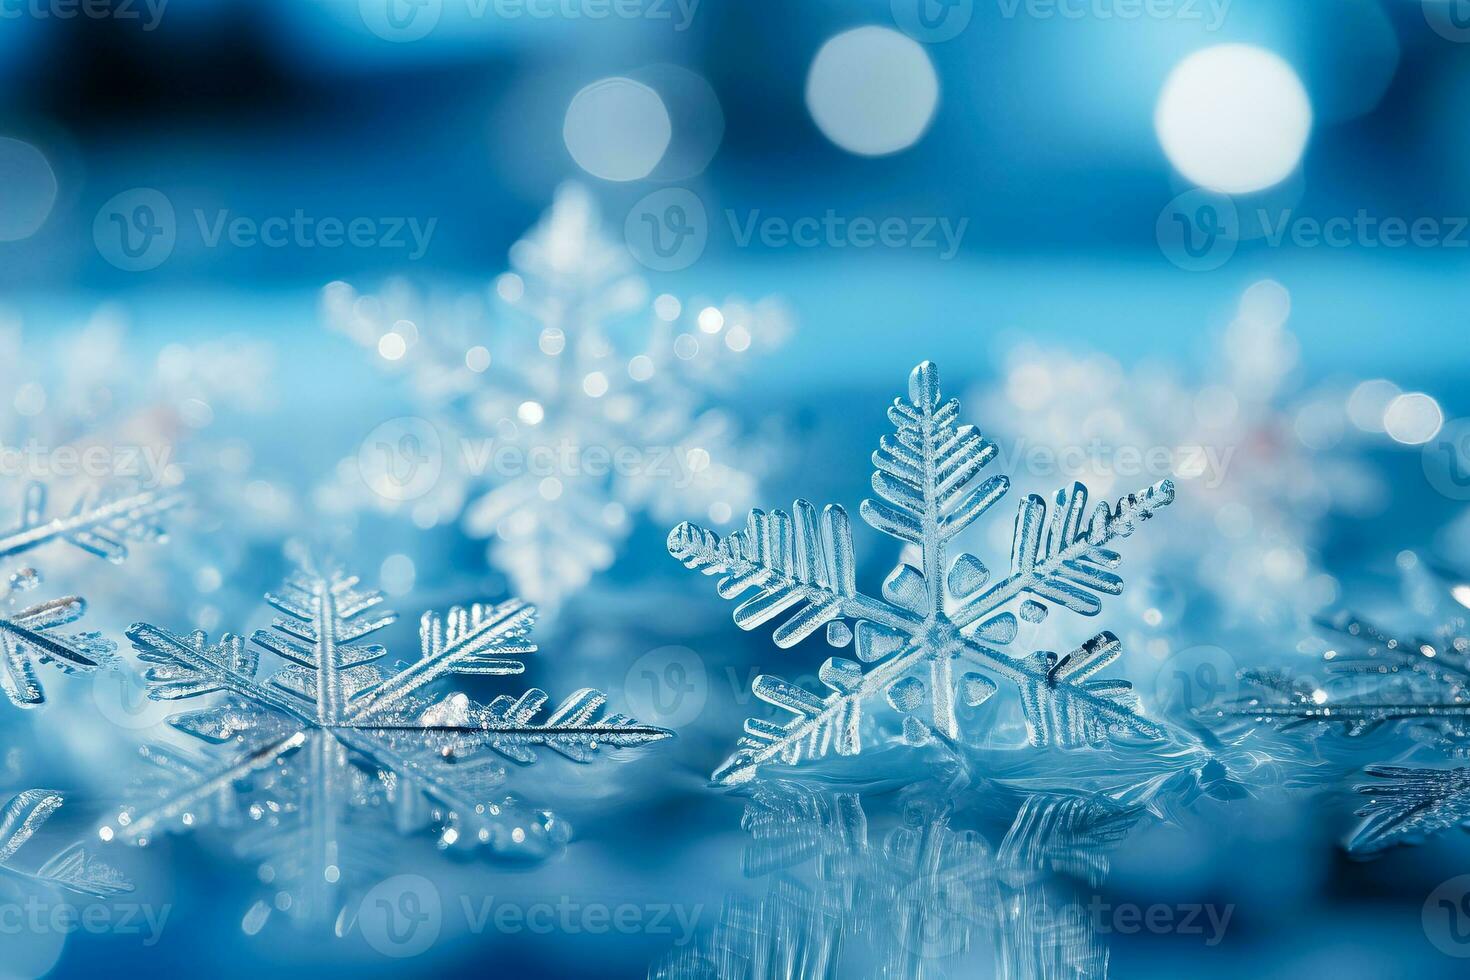 A close-up shot captures intricately detailed snowflakes resting gently on a shimmering icy blue surface photo